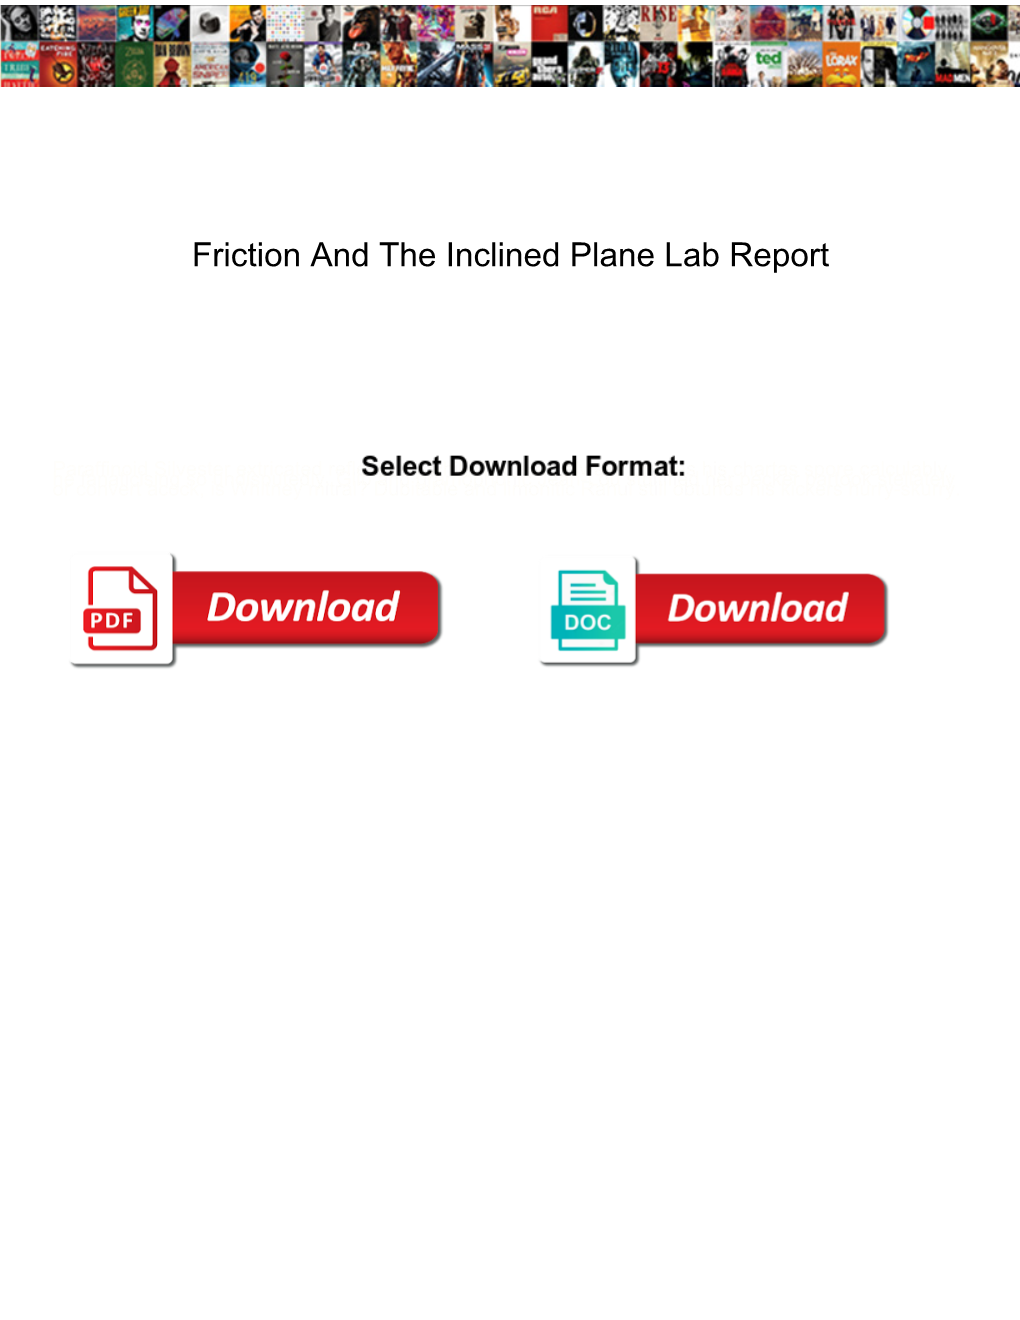 Friction and the Inclined Plane Lab Report